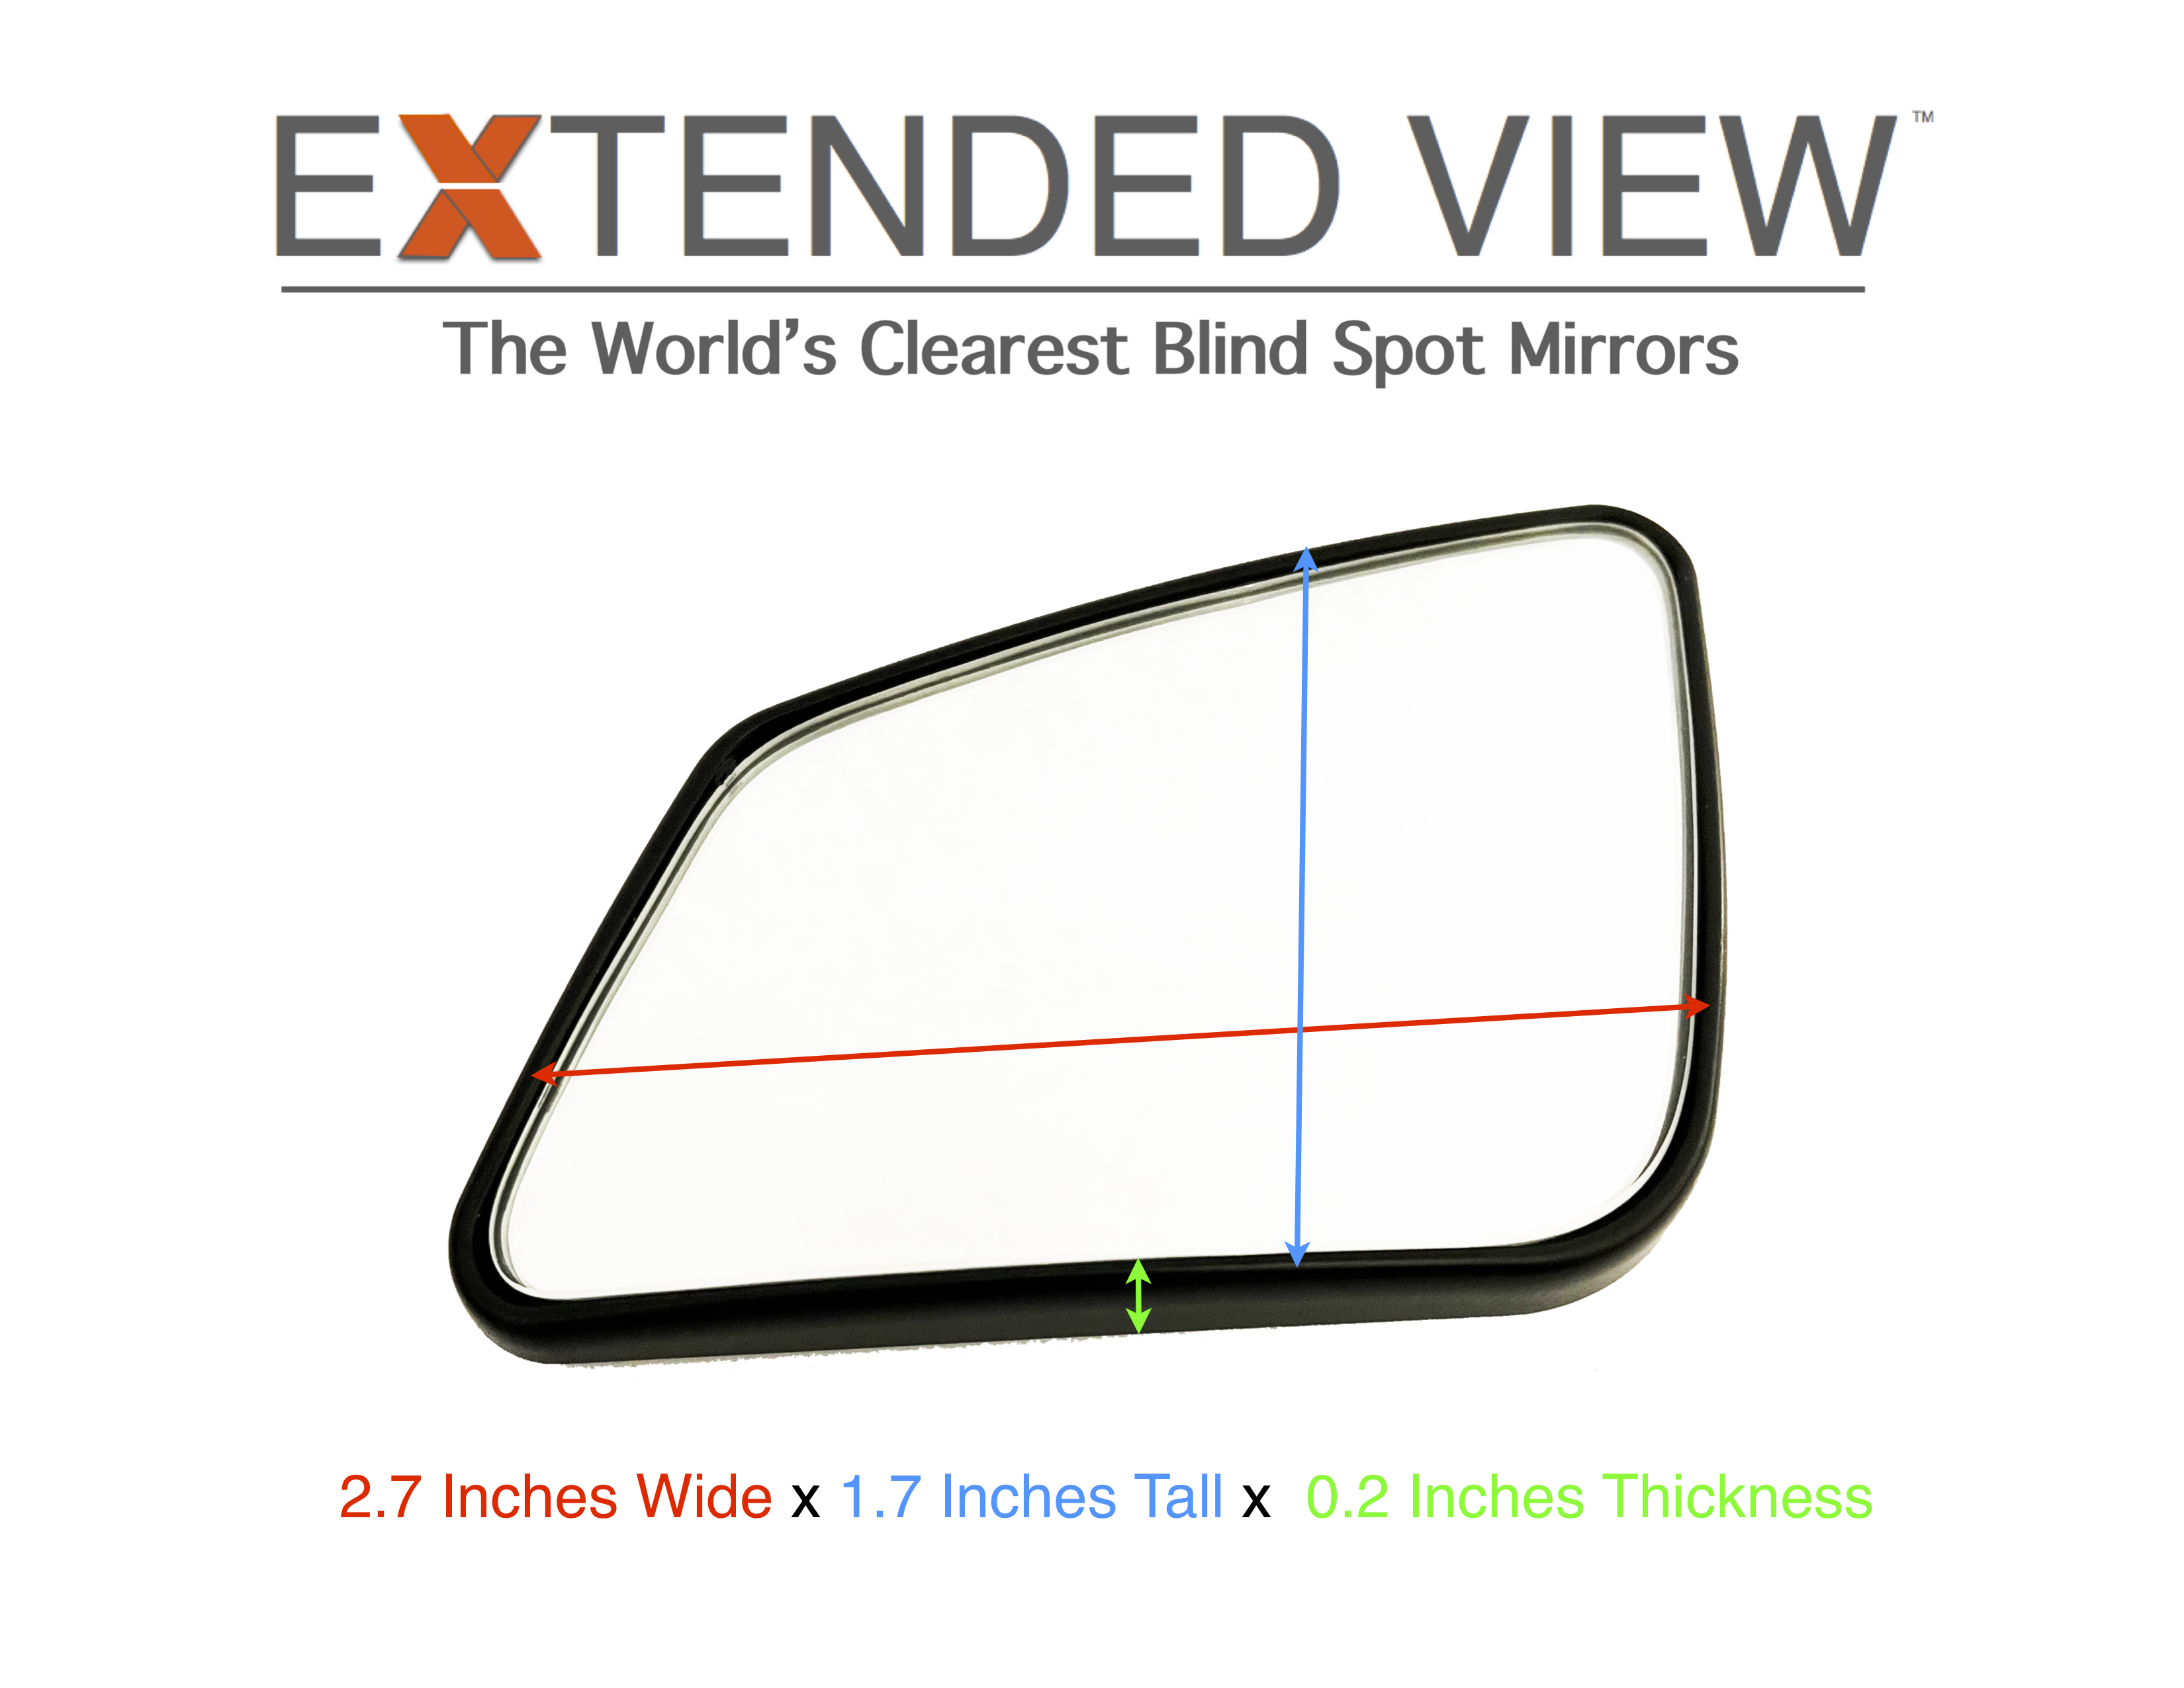 BMW 5 Series Blind Spot Mirrors | F07 GT Extended View™